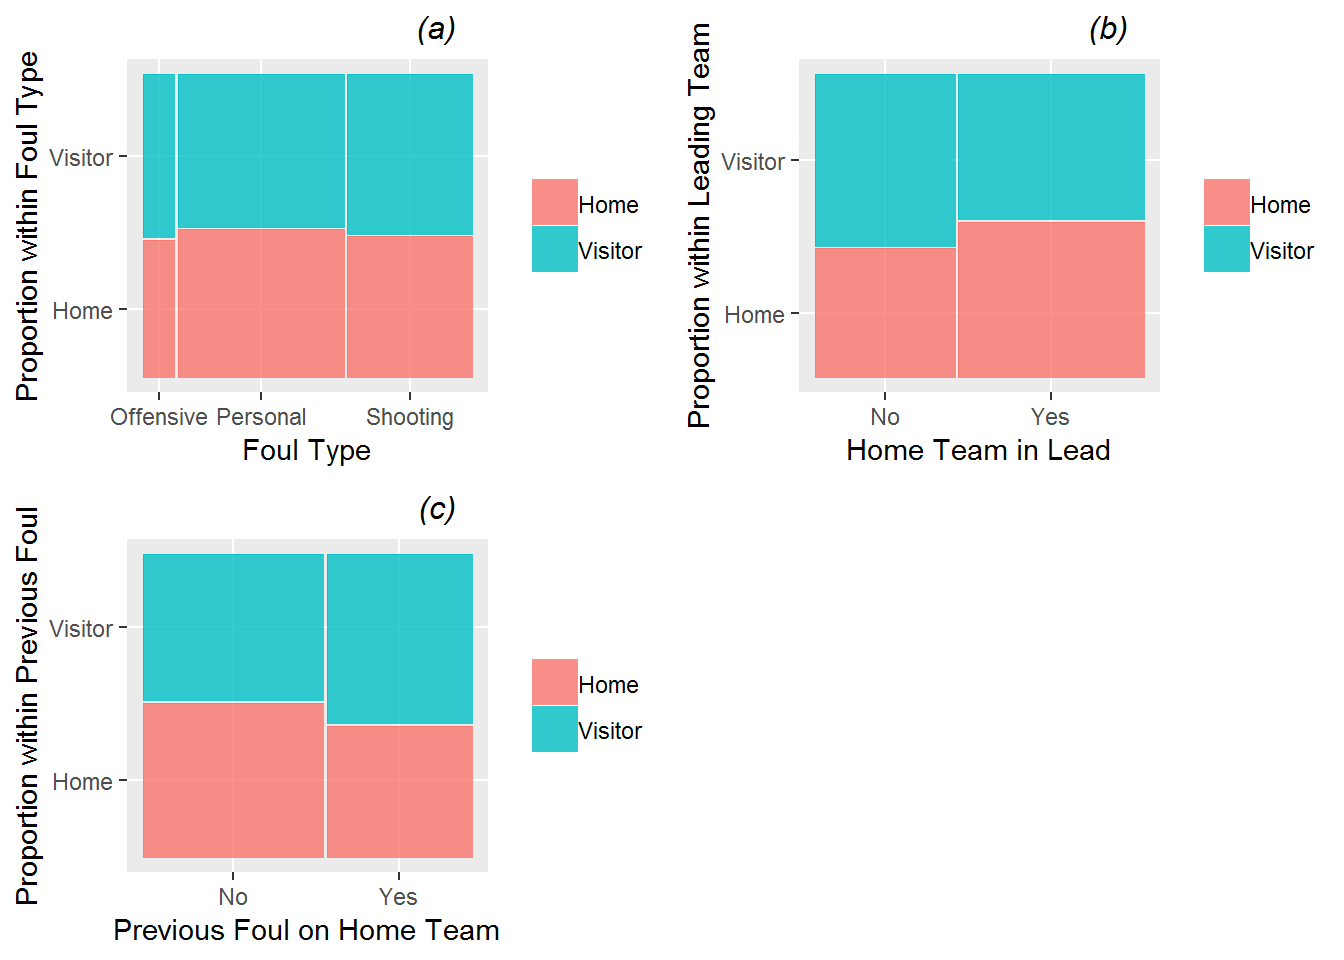 Mosaic plots of the binary model response (foul called on home or visitor) vs. the three categorical Level One covariates (foul type (a), team in the lead (b), and team called for the previous foul (c) ).  Each bar shows the percentage of fouls called on the home team vs. the percentage of fouls called on the visiting team for a particular category of the covariate.  The bar width shows the proportion of fouls at each of the covariate levels.